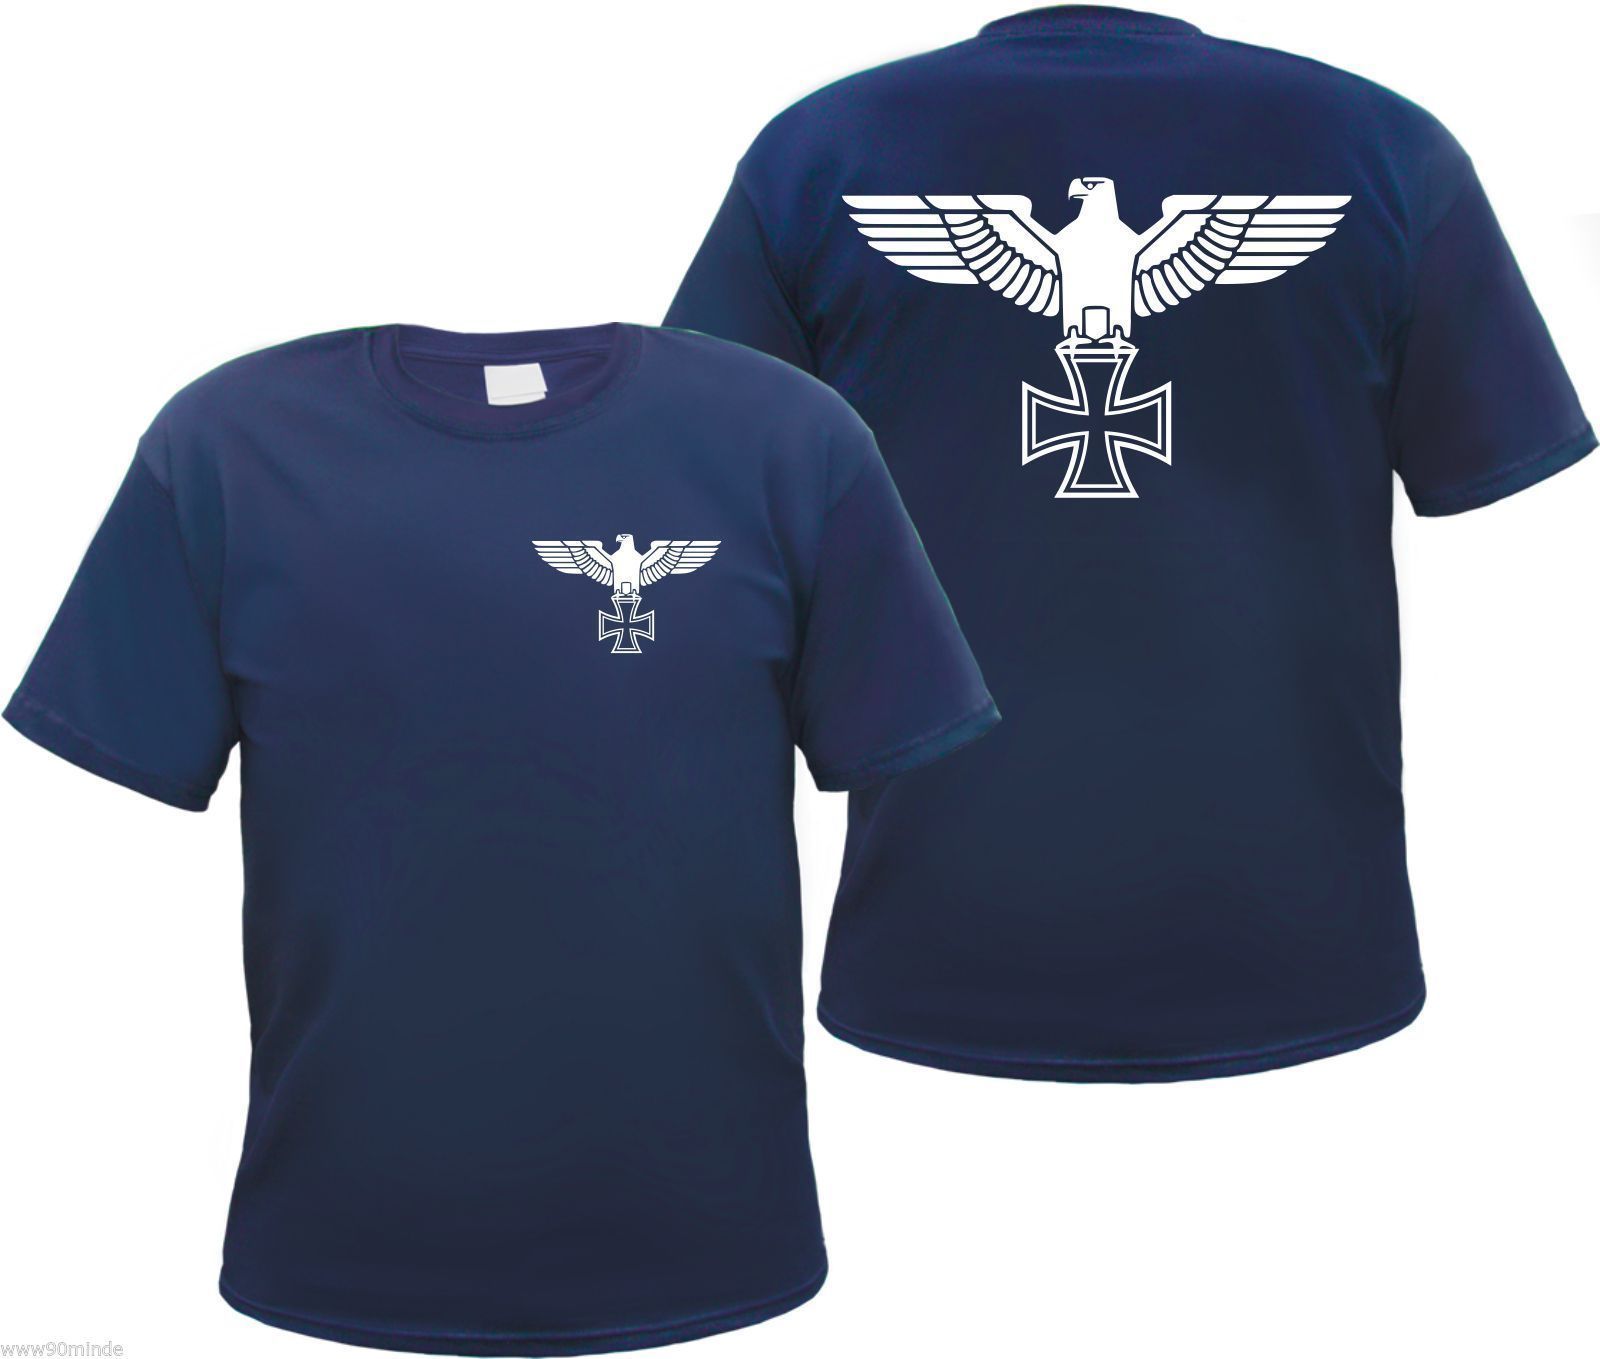 Imperial Eagle T-Shirt - Iron Cross - Navy - Front/Back - S-3XL - Iron  Cross - Price history  Review | AliExpress Seller - Day Design Store |  Alitools.io